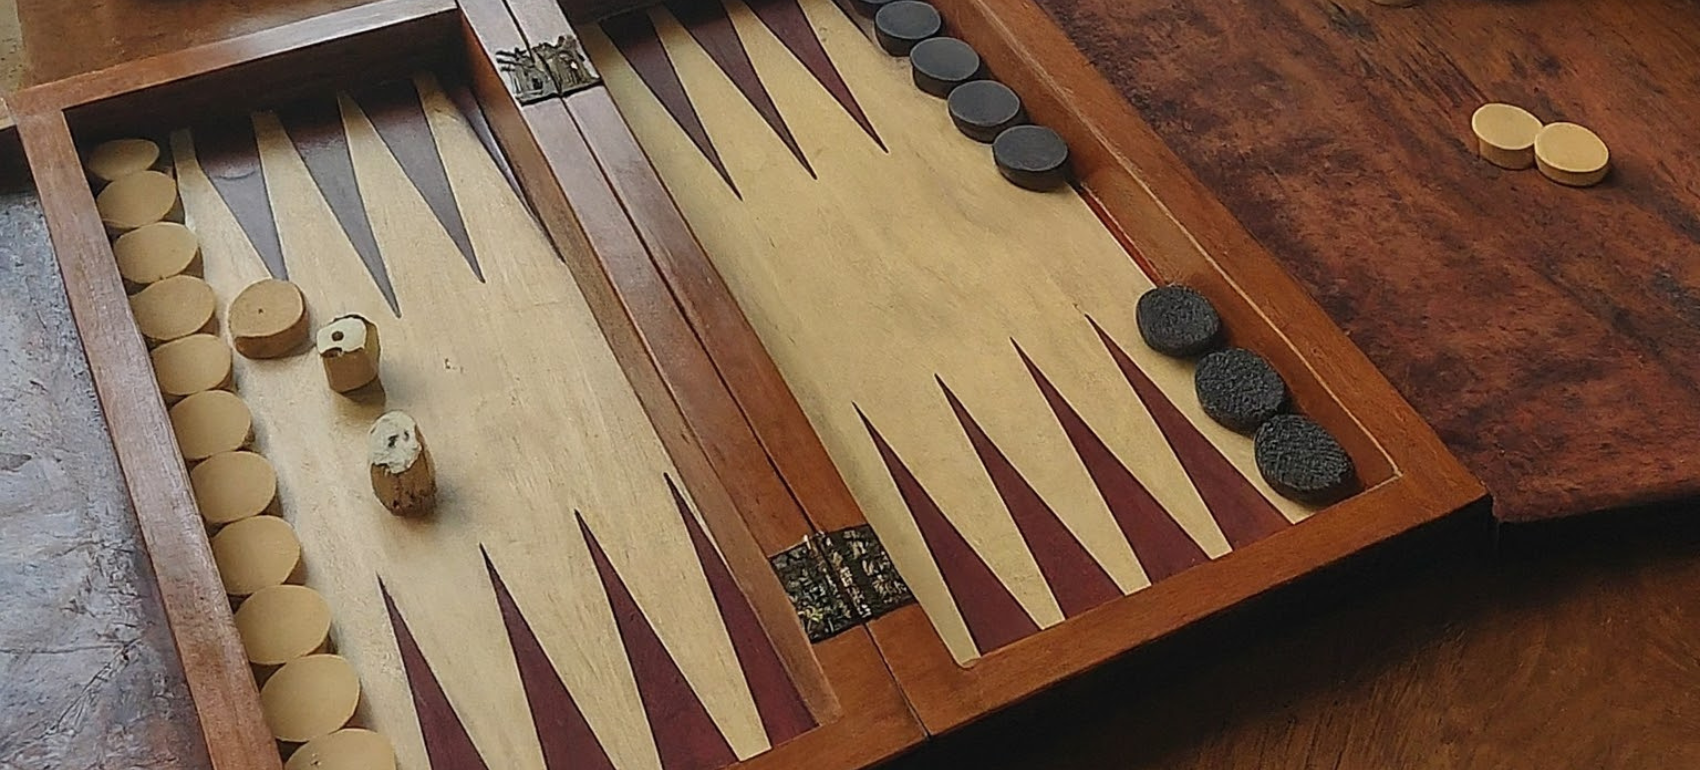 Doubles Backgammon and Beyond: Innovative Ways to Play with Friends